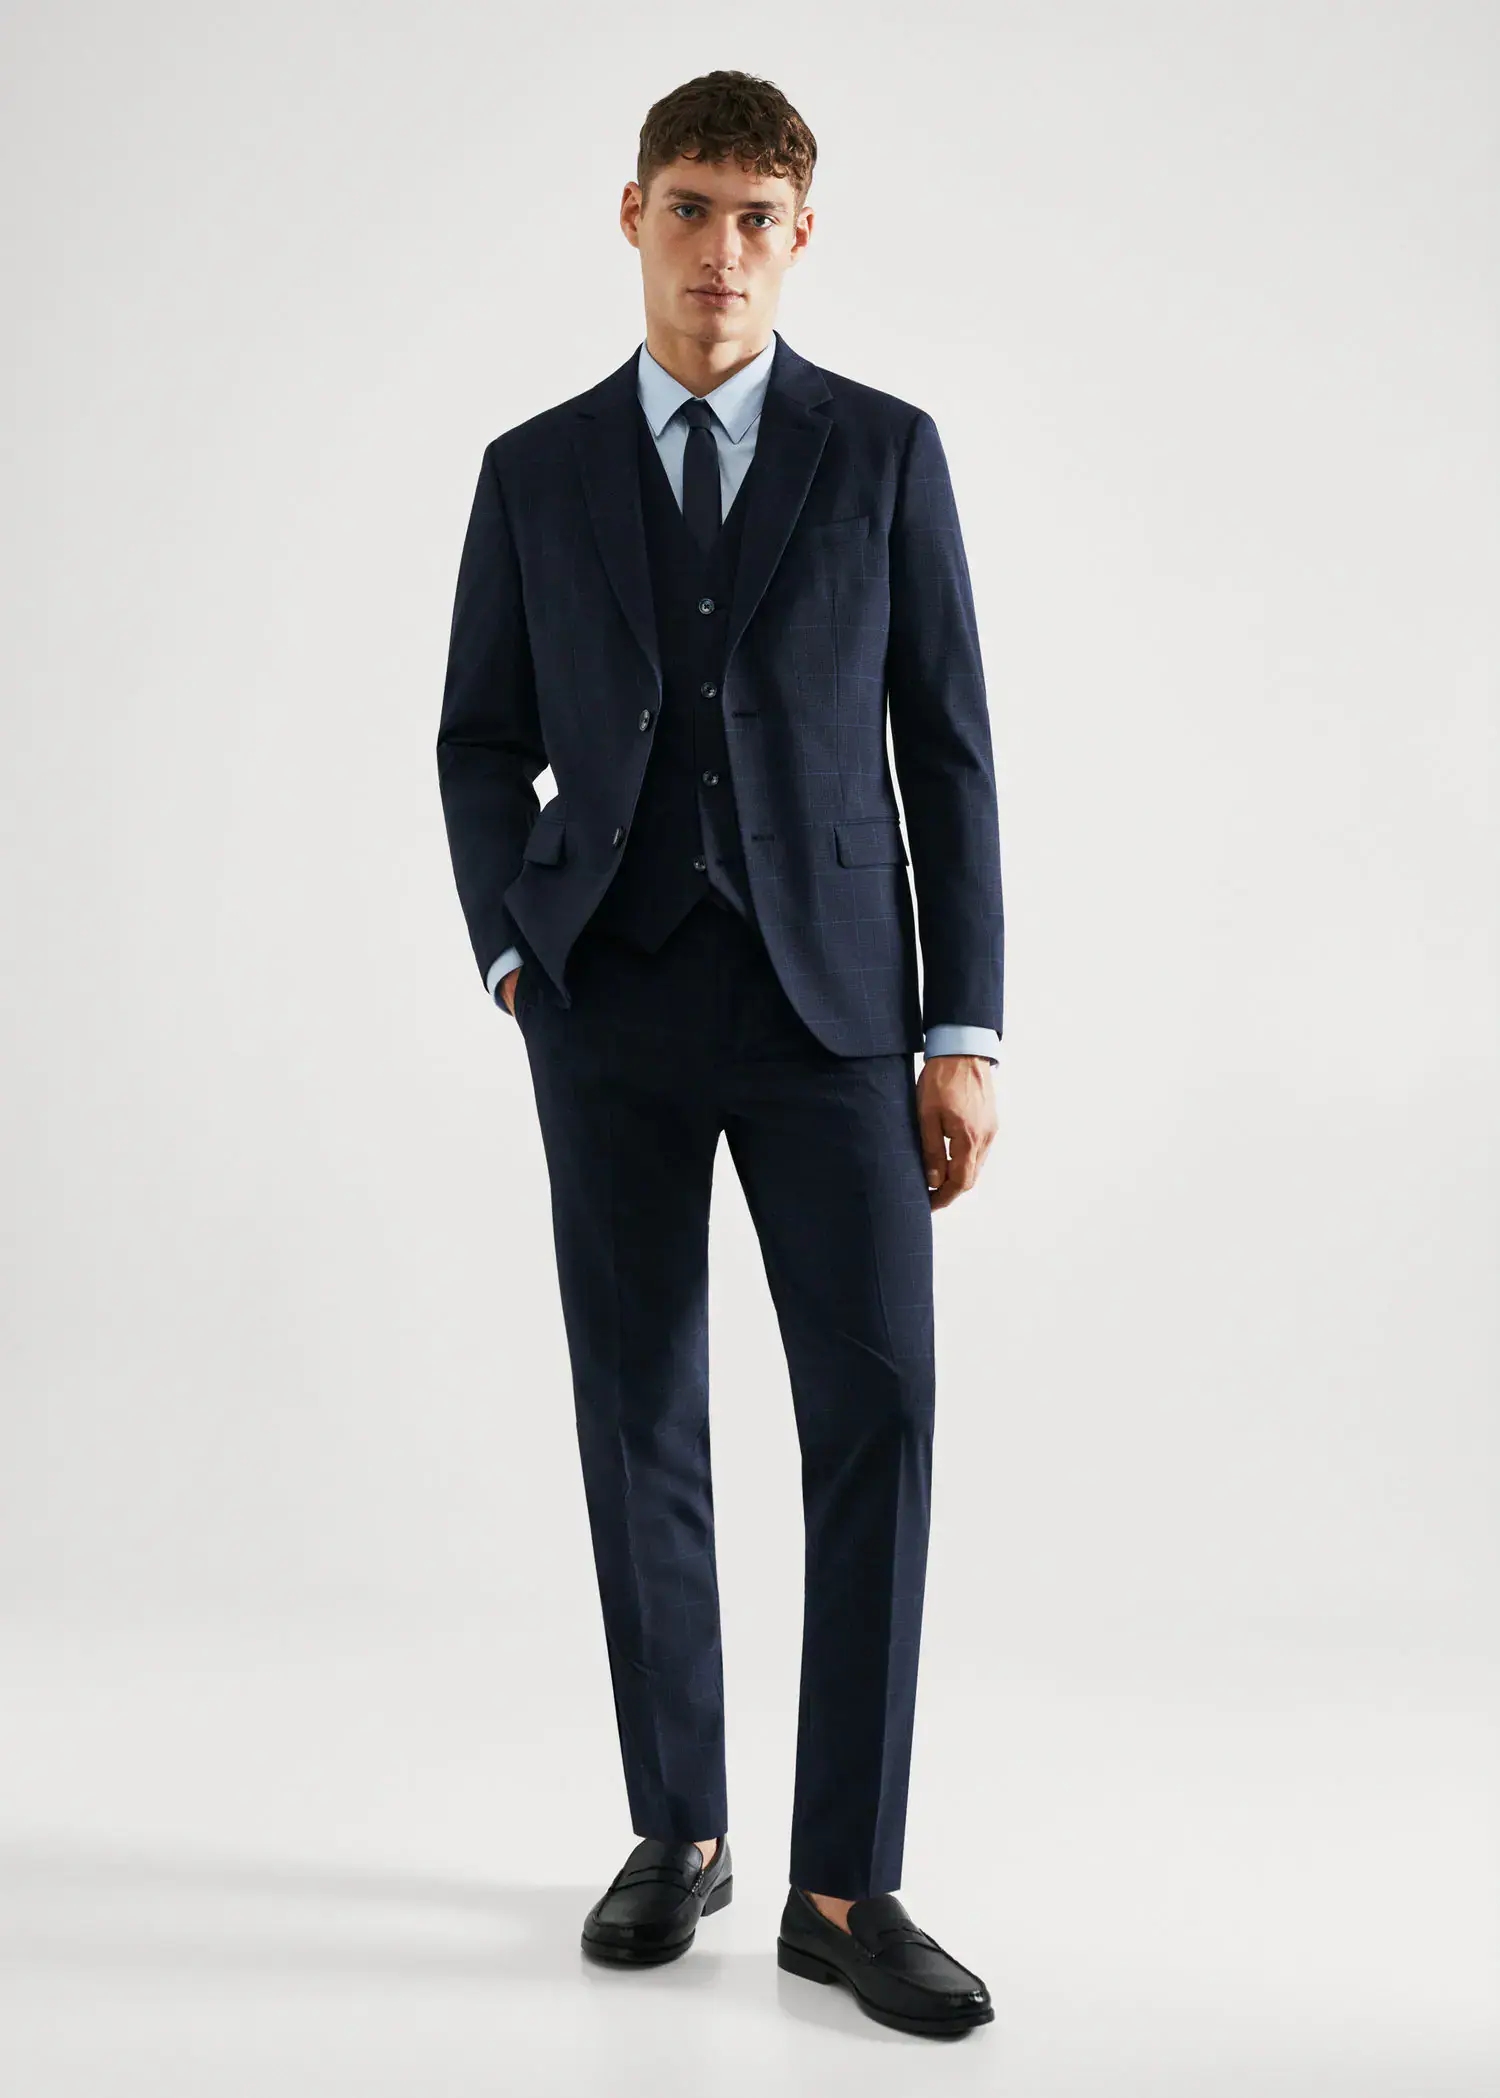 Mango Super slim-fit check suit jacket. a man wearing a suit and tie standing in a room. 